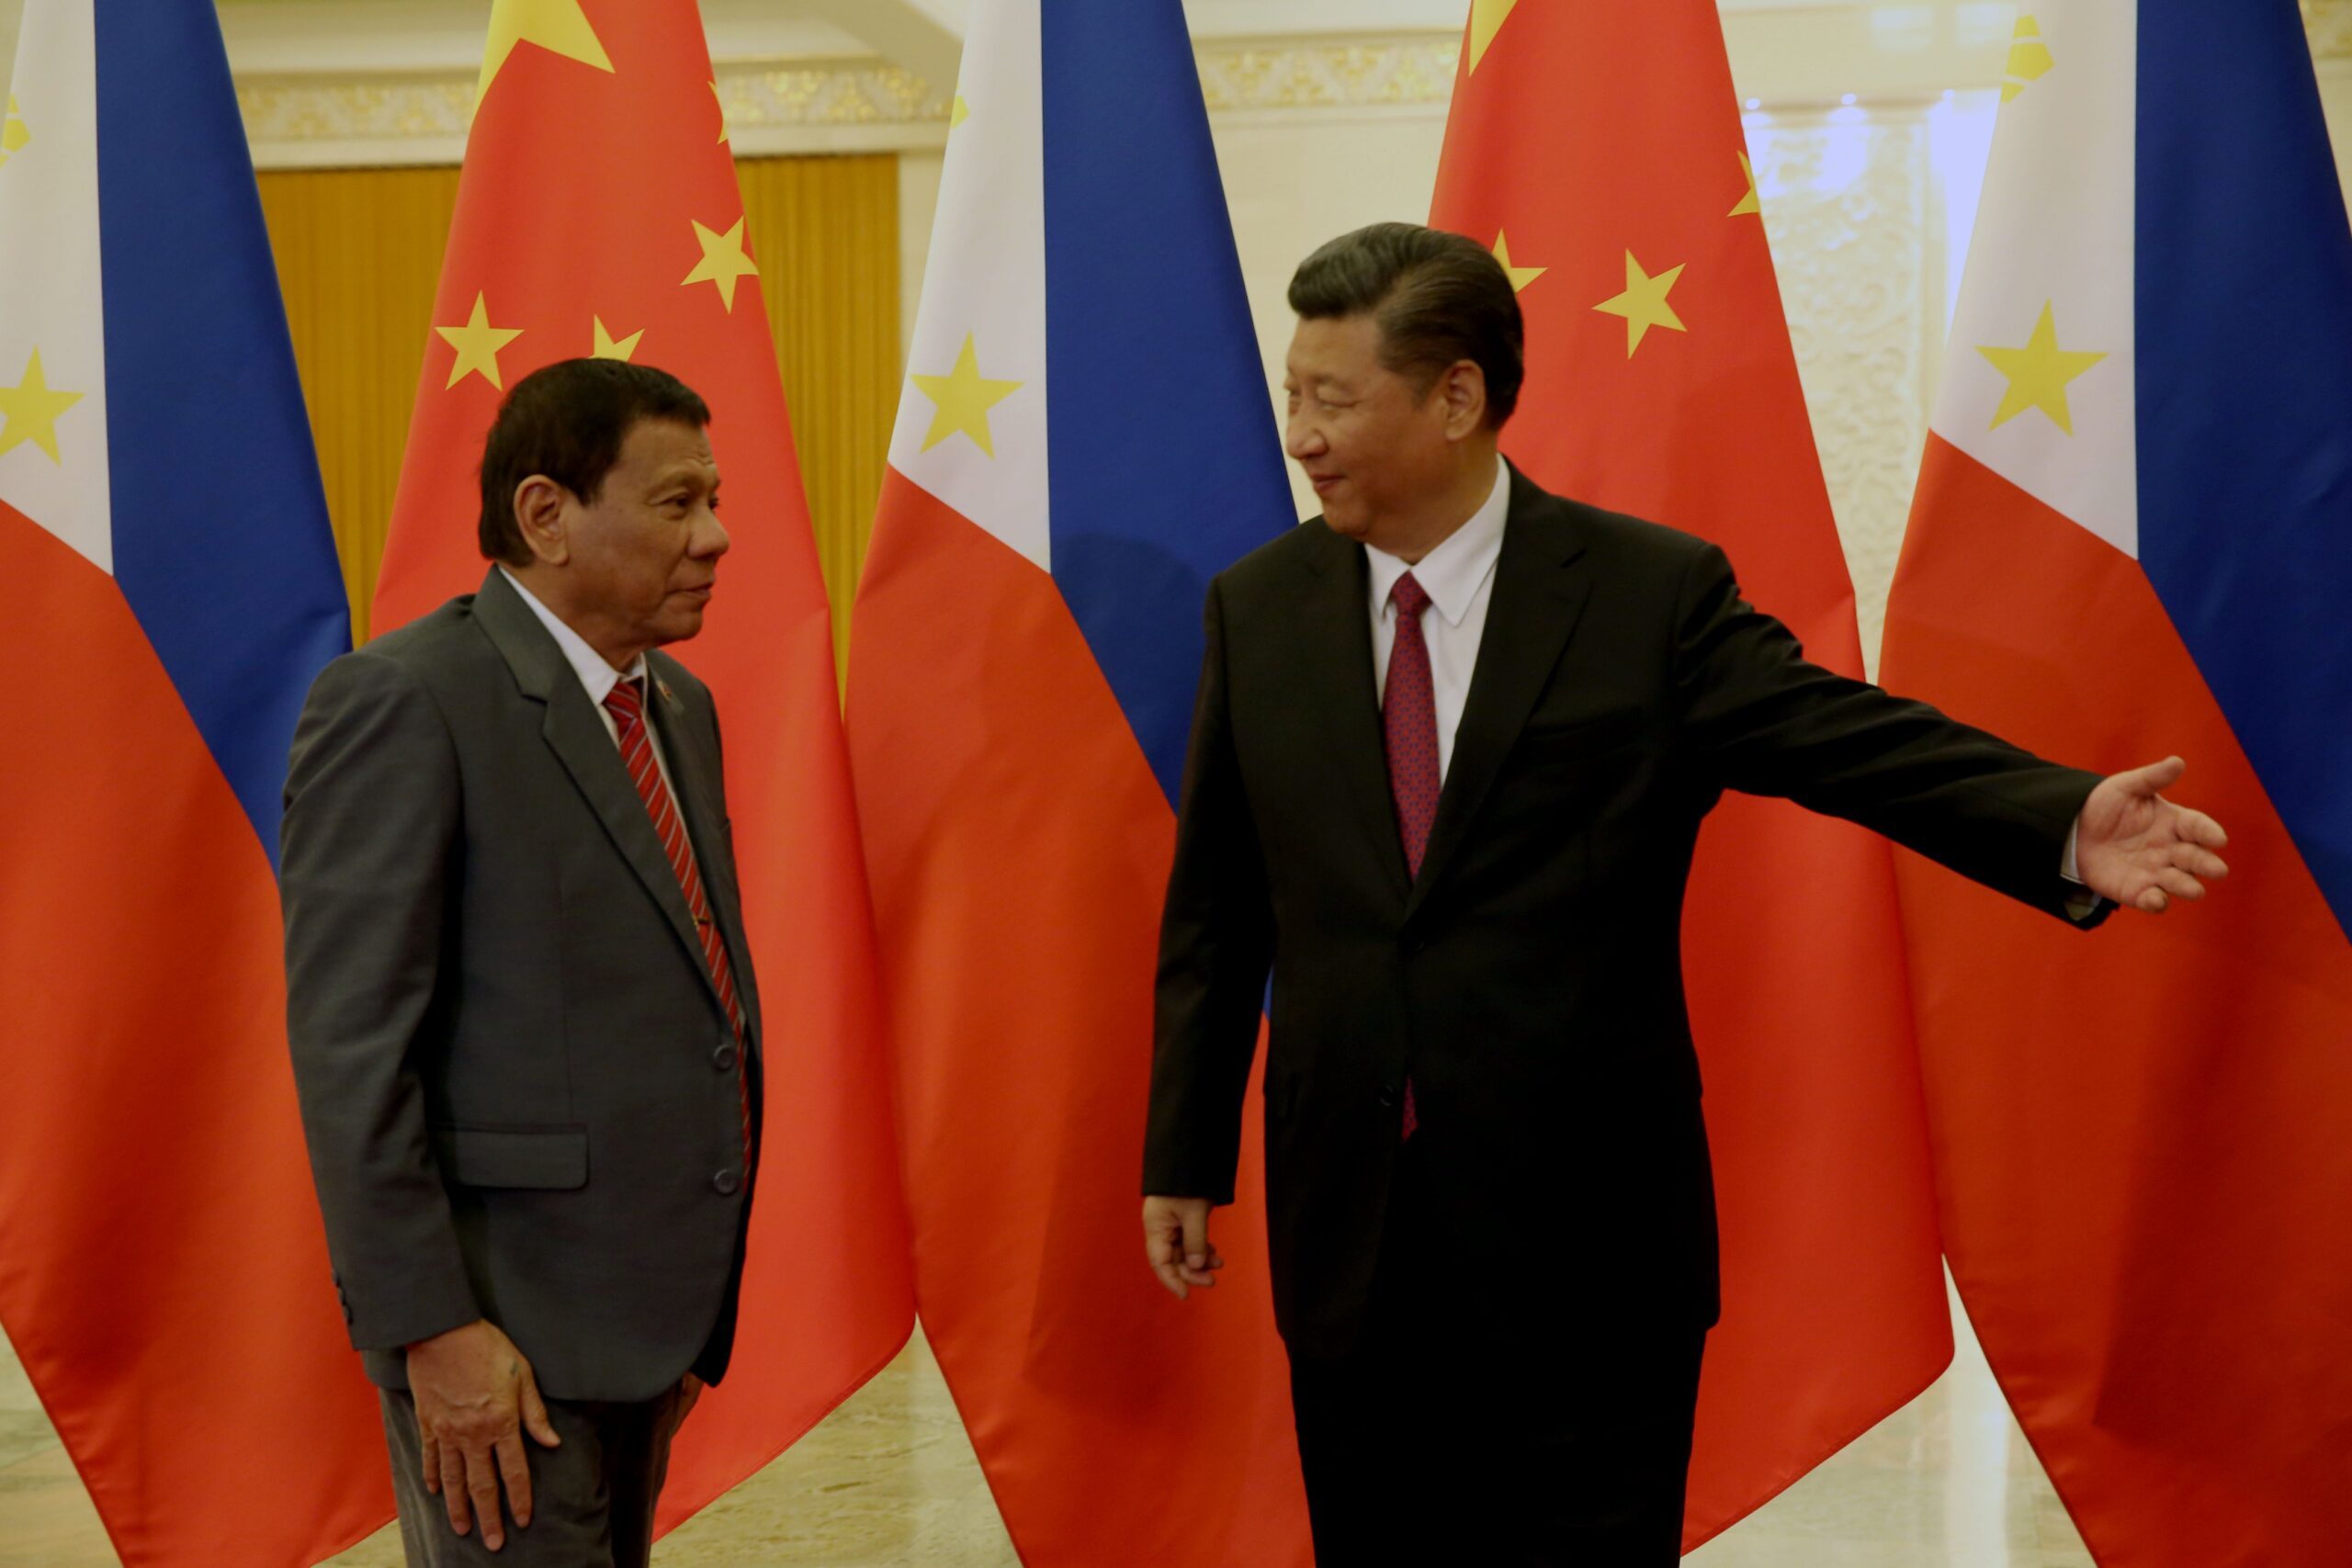 Duterte claims Xi warned of war if PH ‘forces issue’ in disputed sea